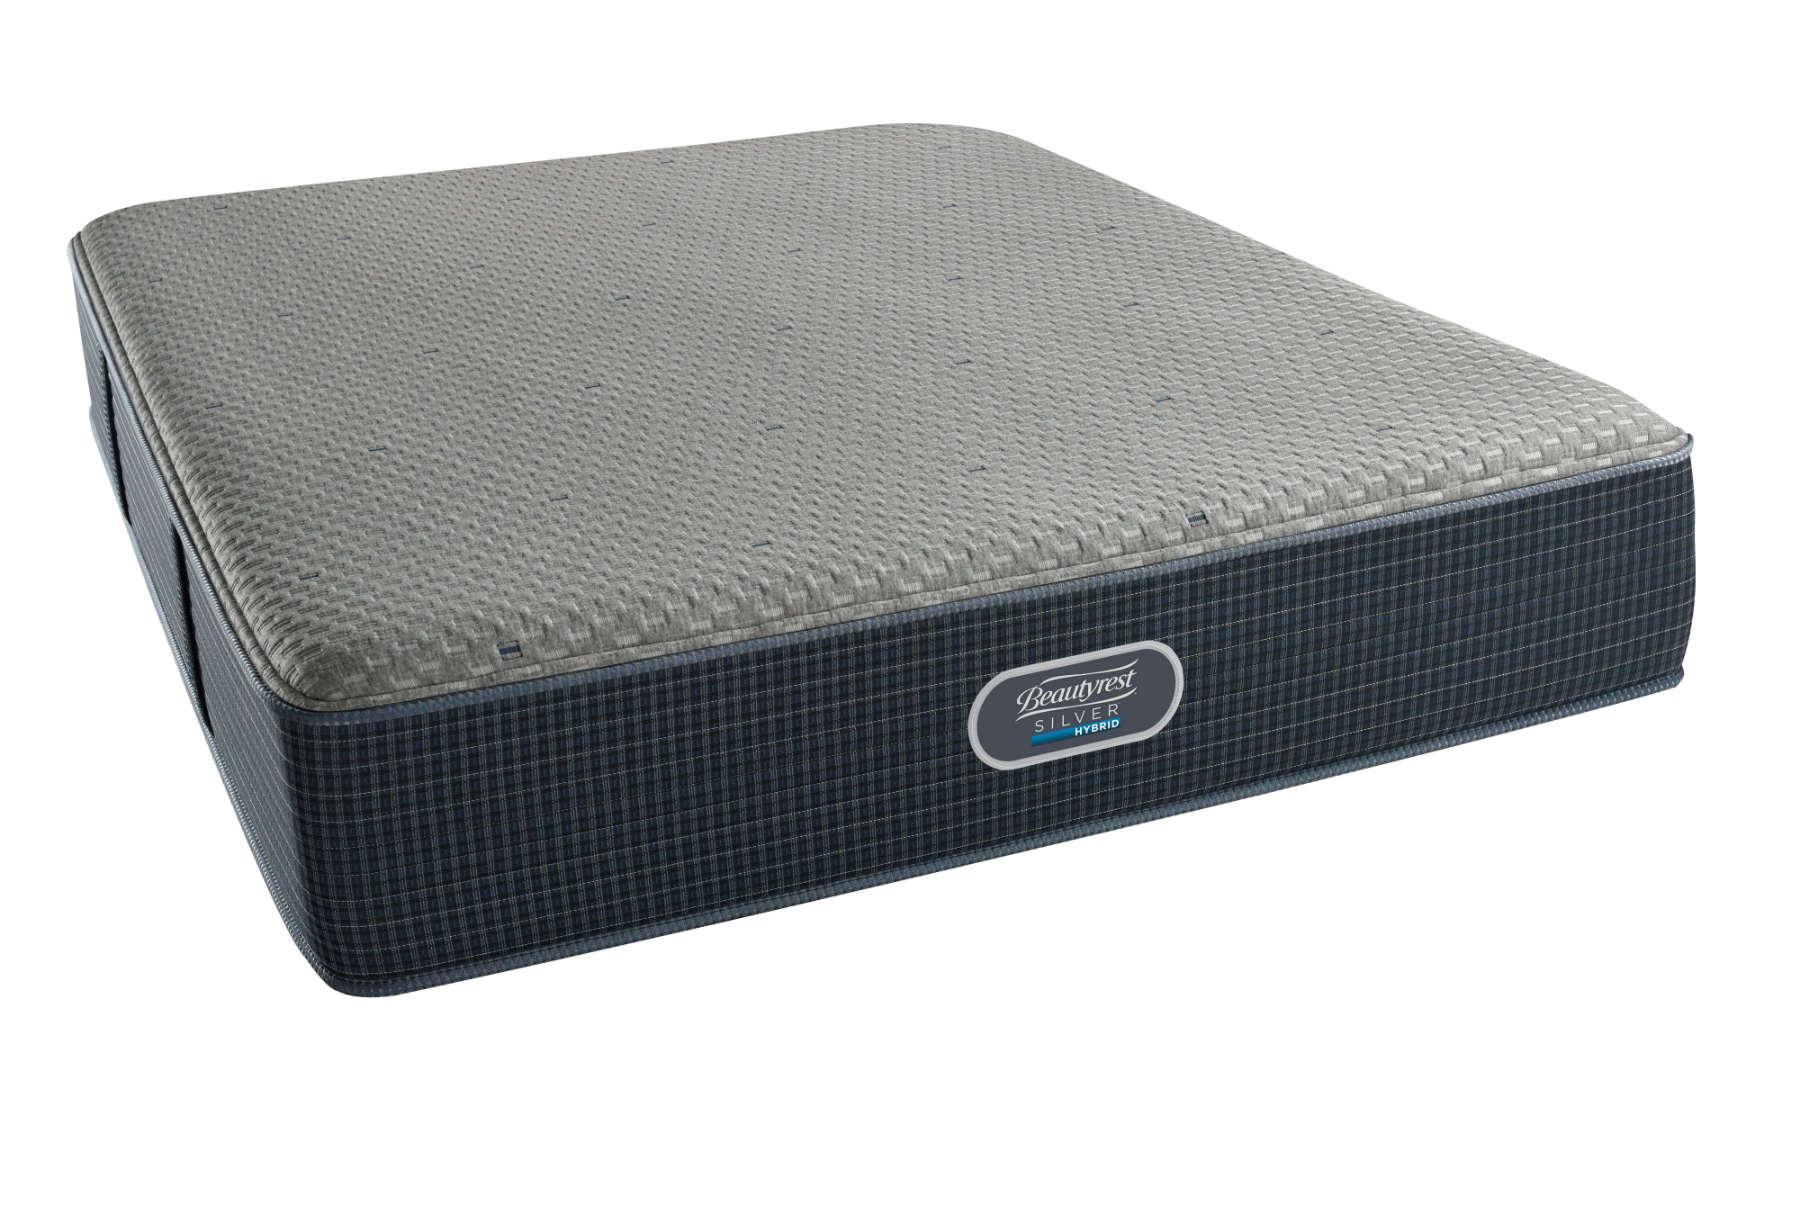 Madison Luxury Firm Mattress- Top 10 Most Comfortable Mattresses to Use